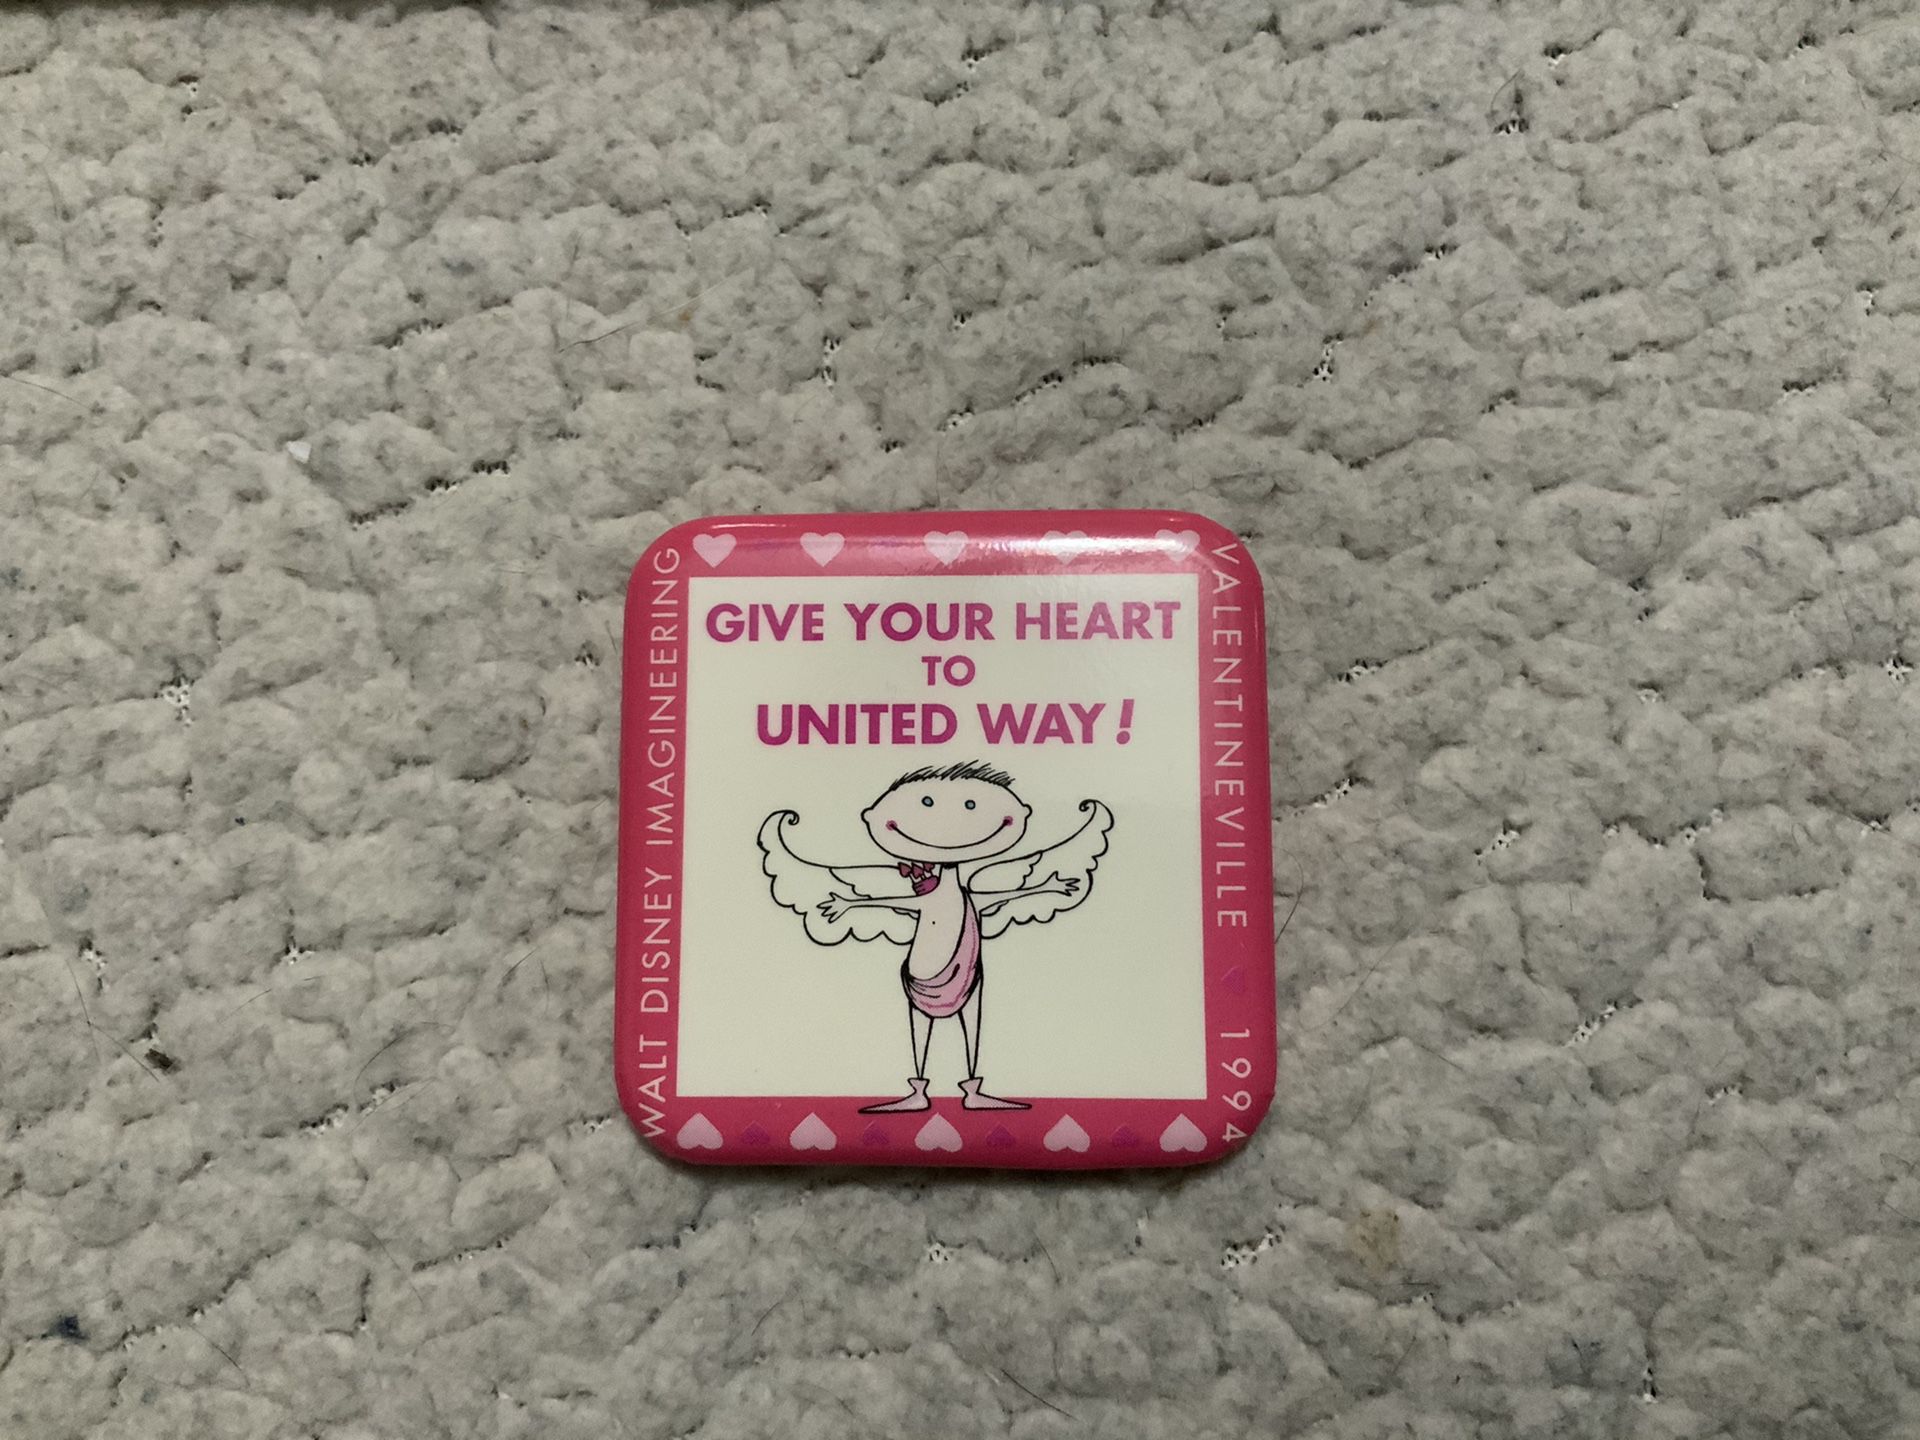 NEW RARE WALT DISNEY IMAGINEERING VALENTINE 1994 GIVE YOUR HEART TO UNITED WAY PIN (EXCELLENT CONDITION)